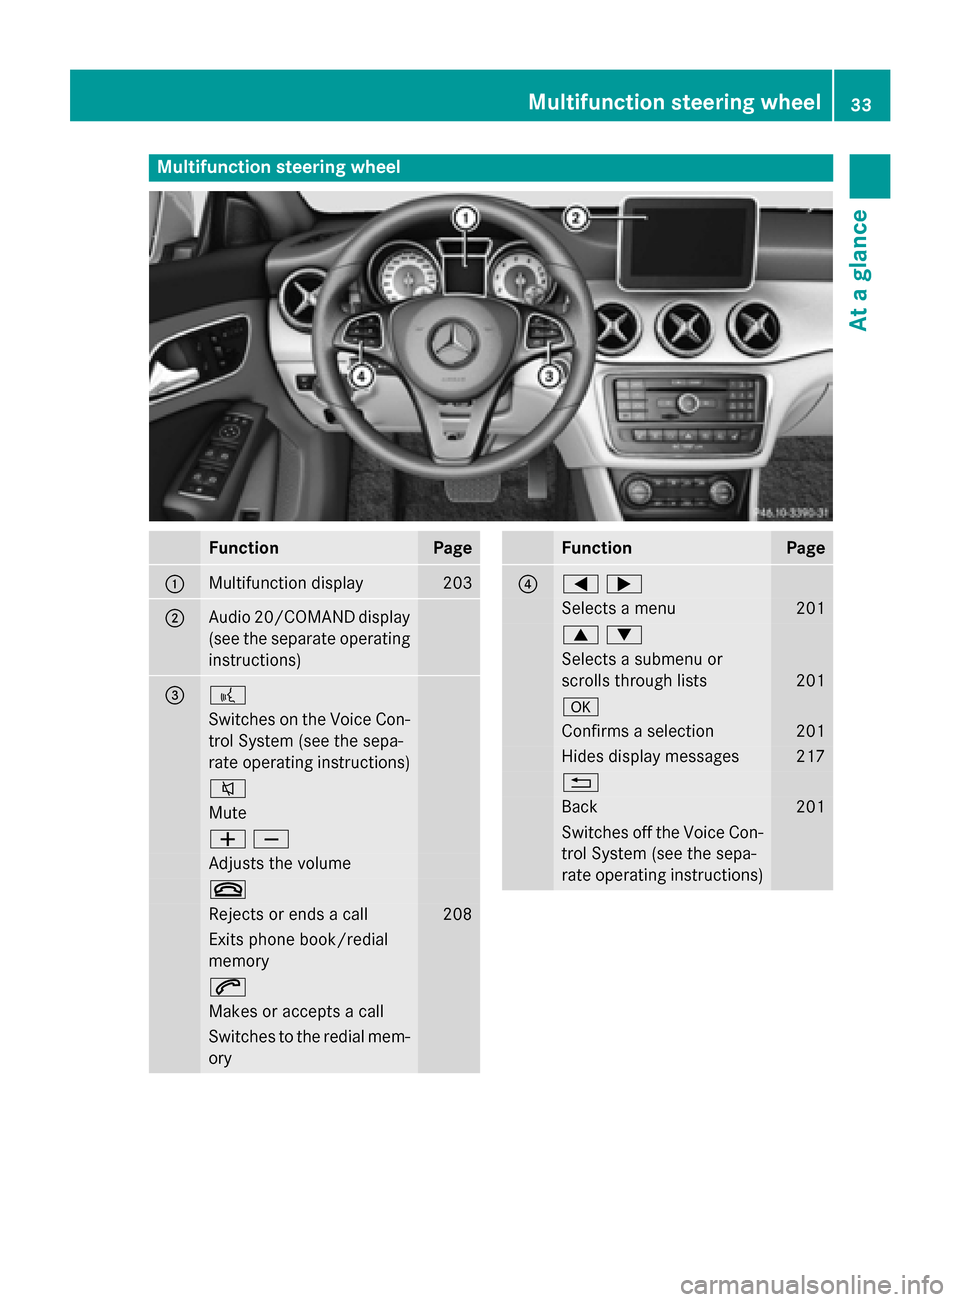 MERCEDES-BENZ CLA-Class 2015 C117 Owners Manual Multifunction steering wheel
Function Page
:
Multifunction display 203
;
Audio 20/COMAND display
(see the separate operating
instructions) = ?
Switches on the Voice Con-
trol System (see the sepa-
rat